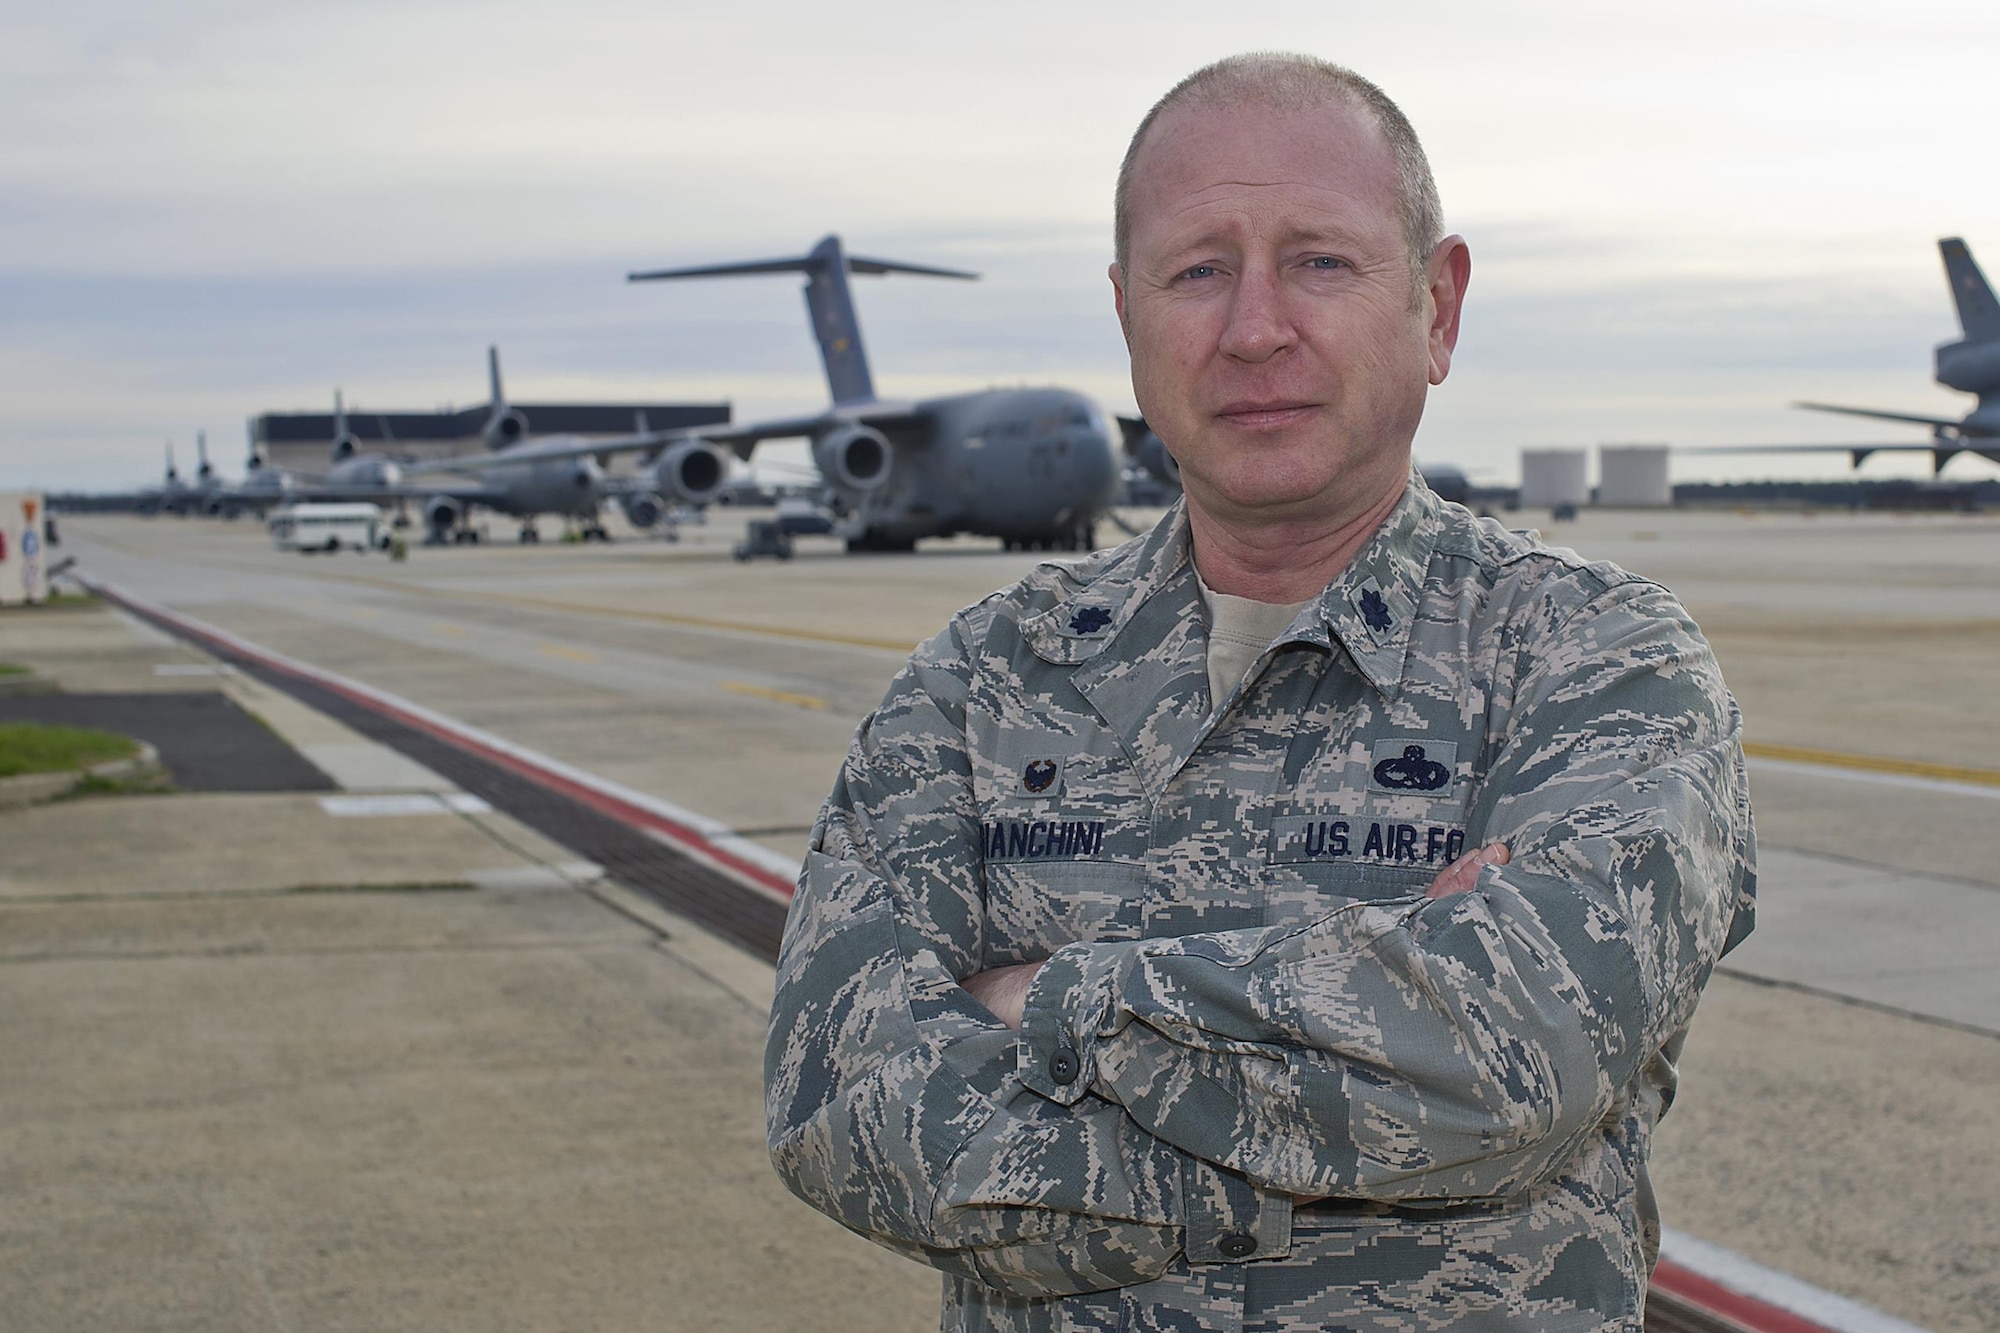 Three Air Force Reserve officers have been selected to lead active-duty units under the voluntary Extended Active Duty tour program. Lt. Col. Matthew Bianchini, 514th Maintenance Squadron commander, Joint Base McGuire-Dix-Lakehurst, New Jersey, will lead the 736th Aircraft Maintenance Squadron at Dover AFB, Delaware. (U.S. Air Force photo/Shawn Jones)